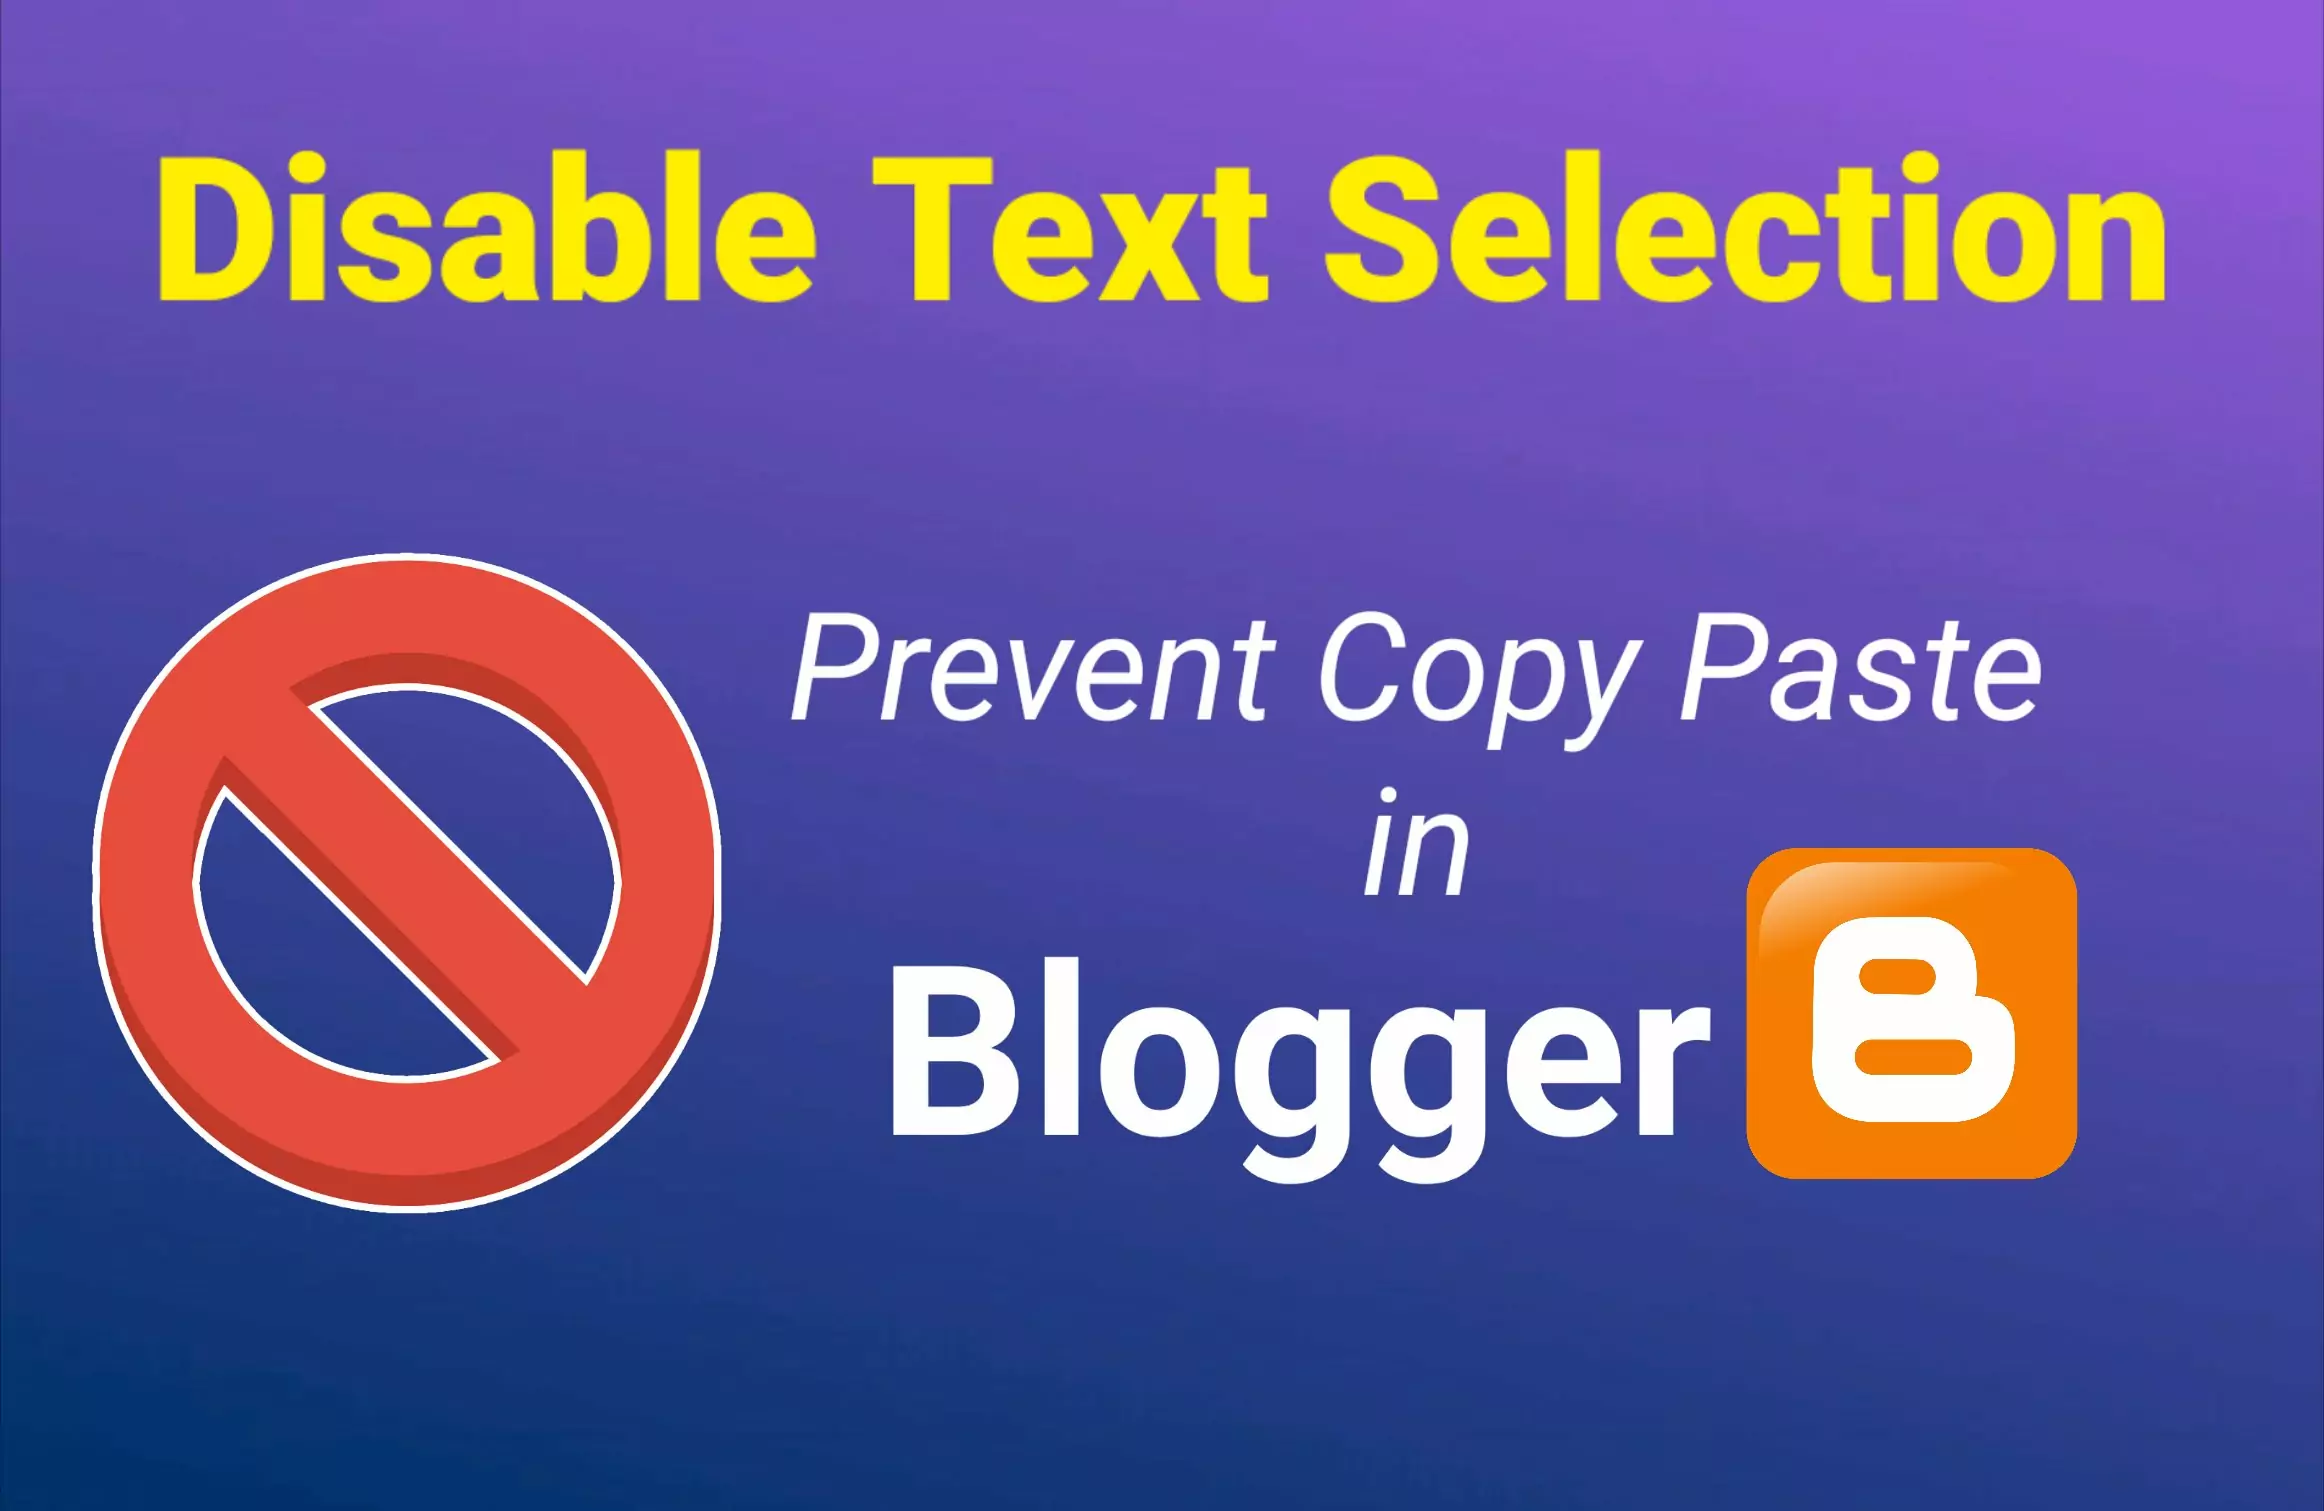 How to Disable Copy Paste in Blogger | Disable Text Selection & Protect Content